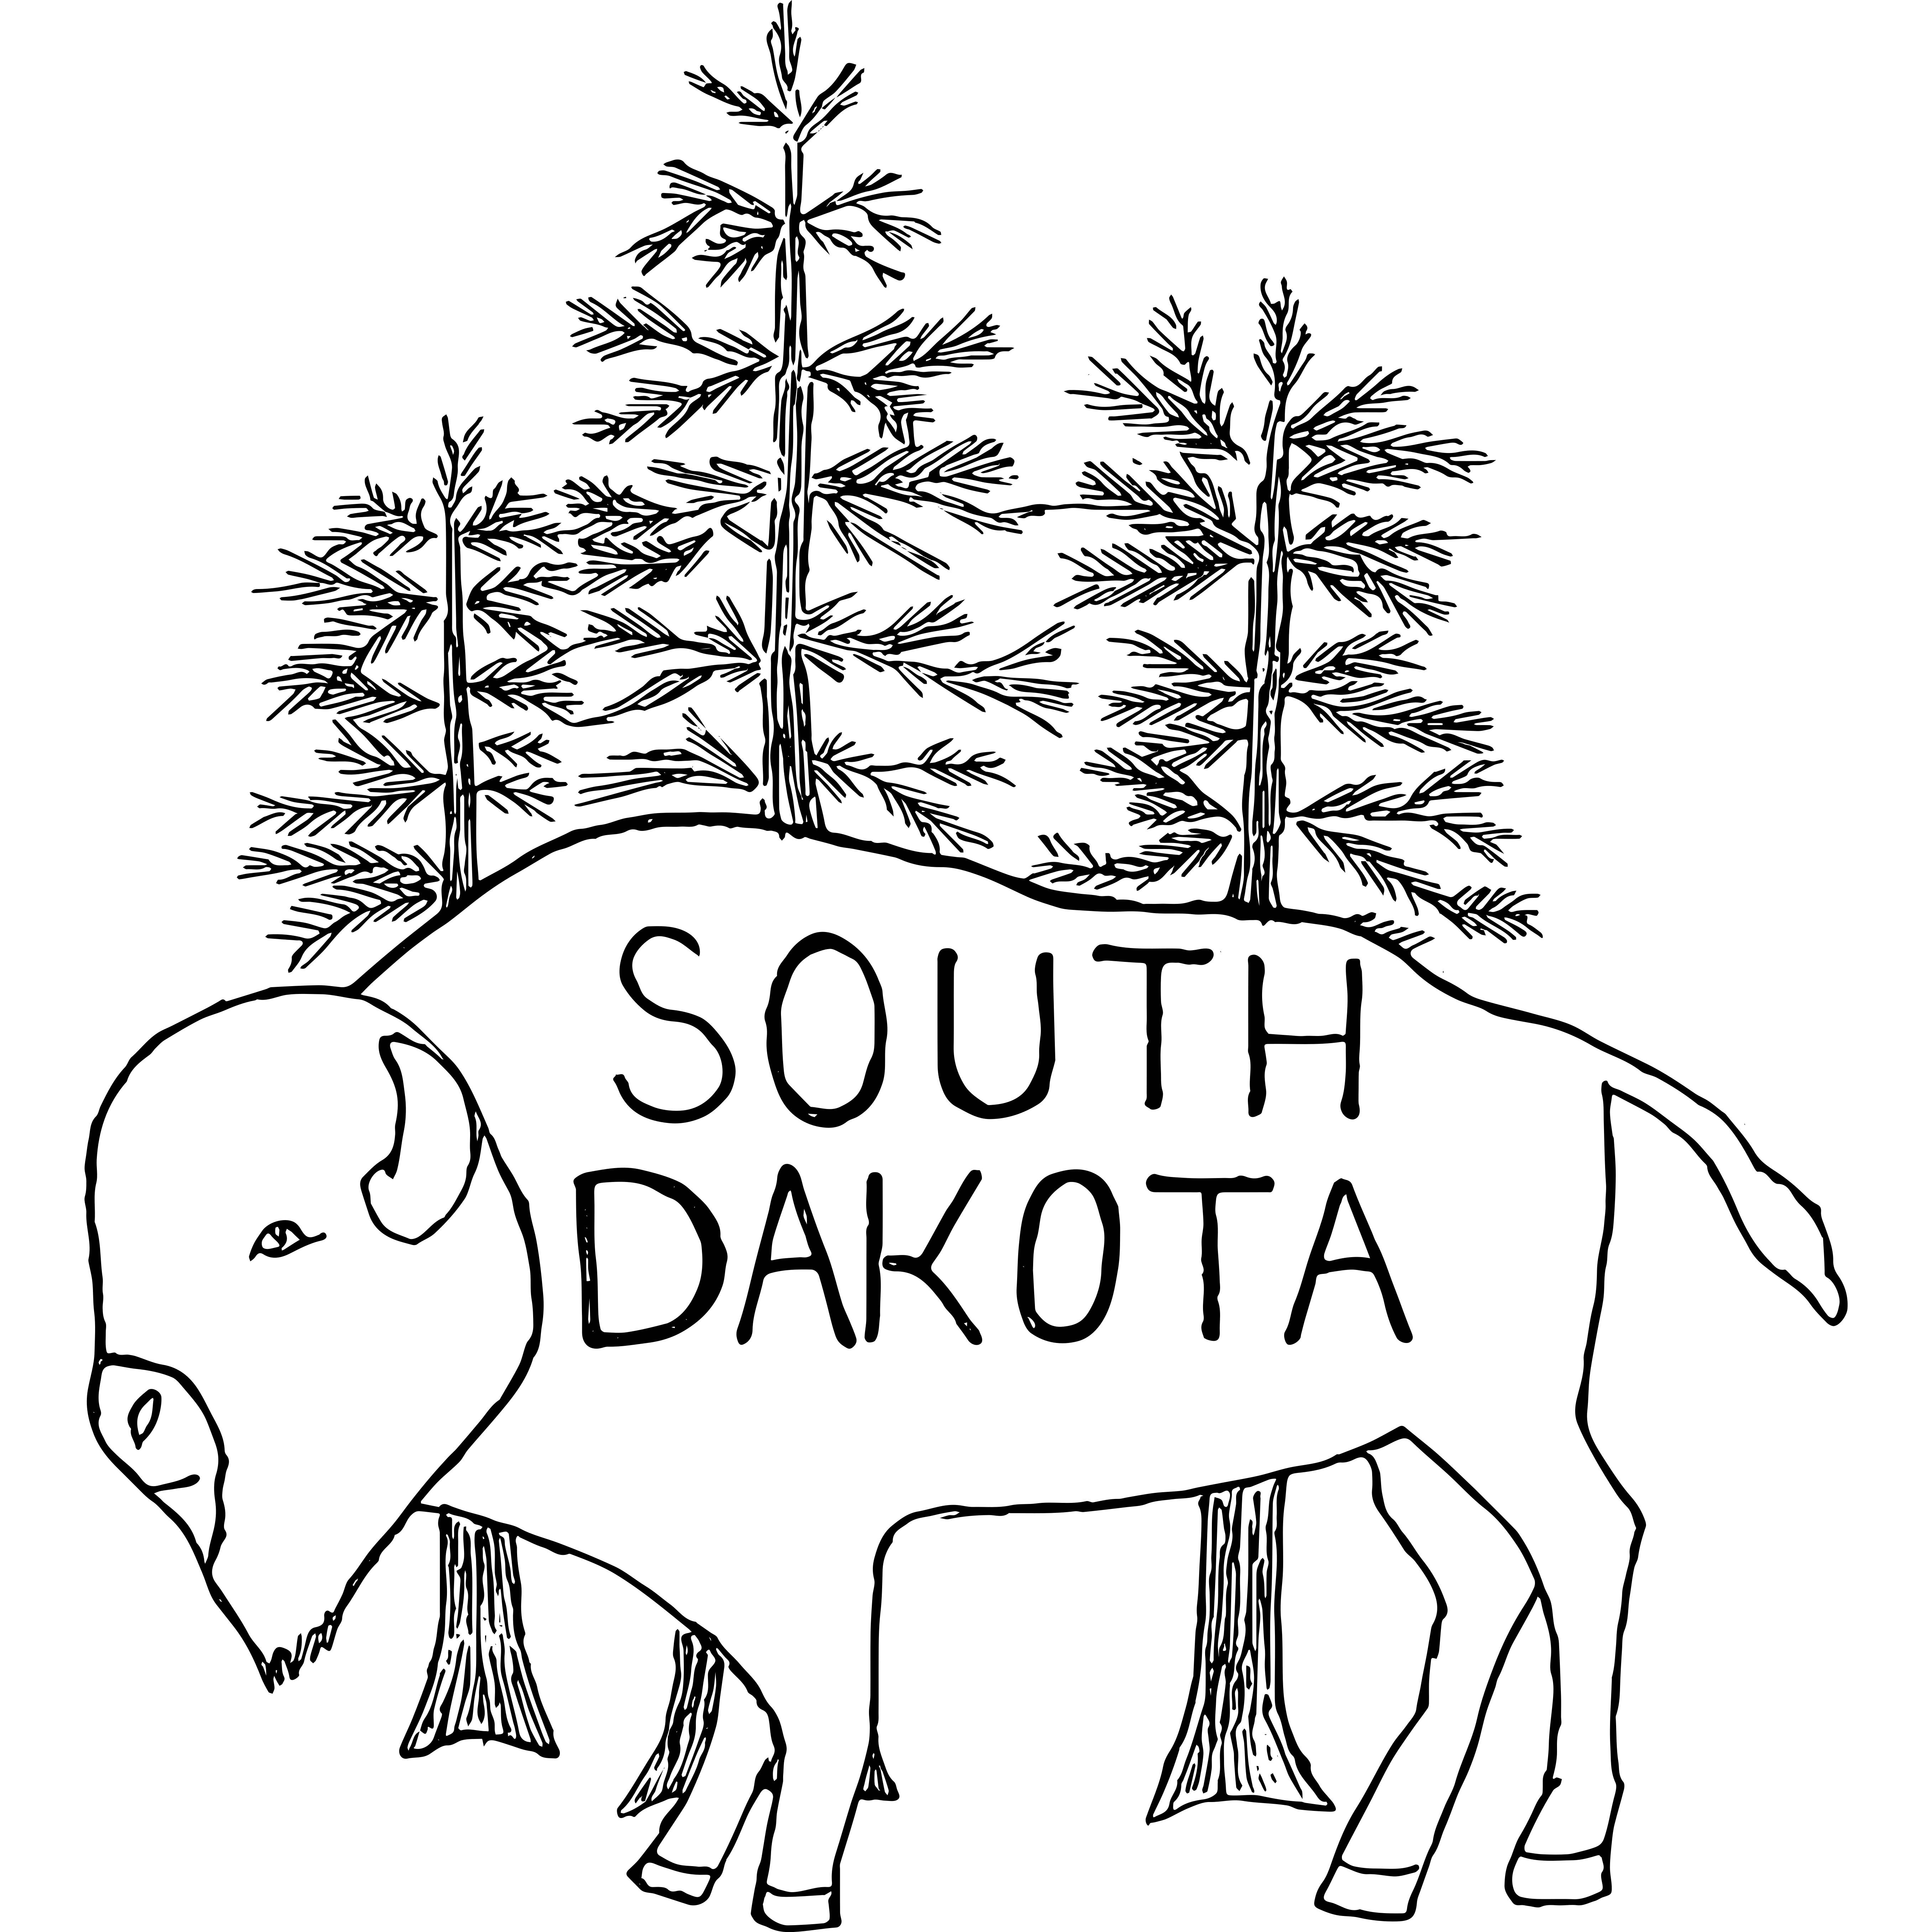 A Bison and trees. It says South Dakota on the bison